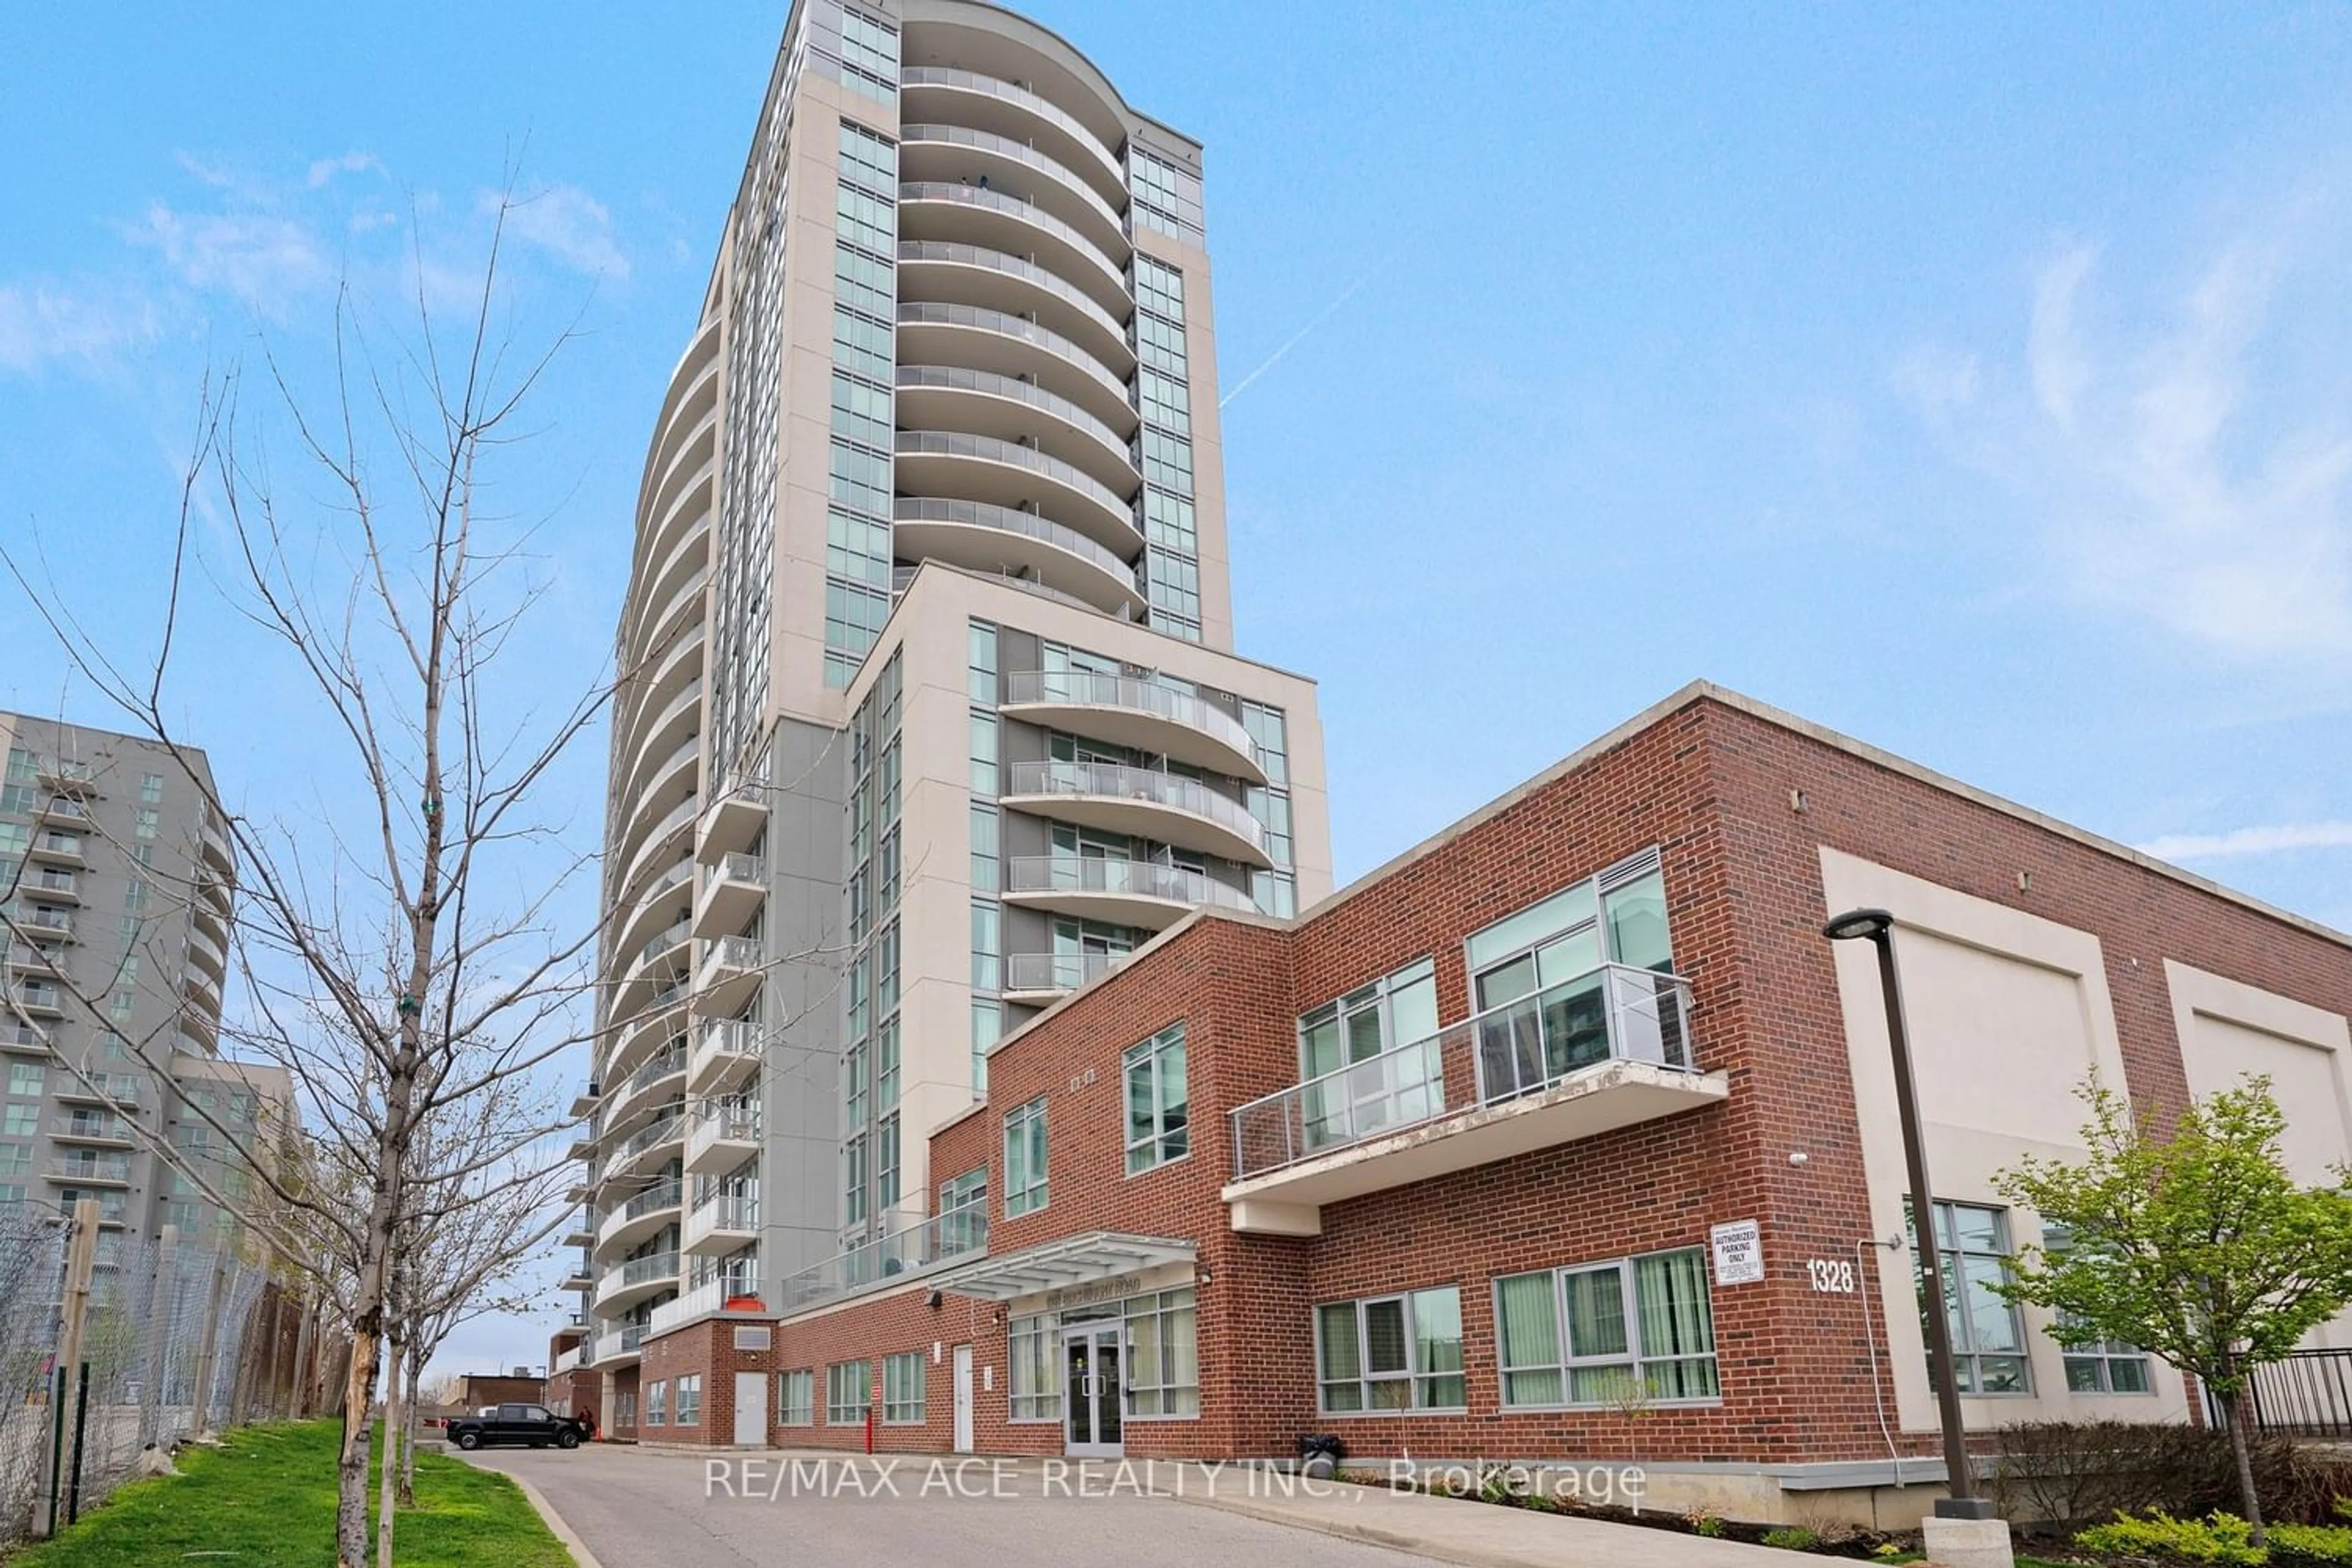 A pic from exterior of the house or condo for 1328 Birchmount Rd #2004, Toronto Ontario M1R 0B6